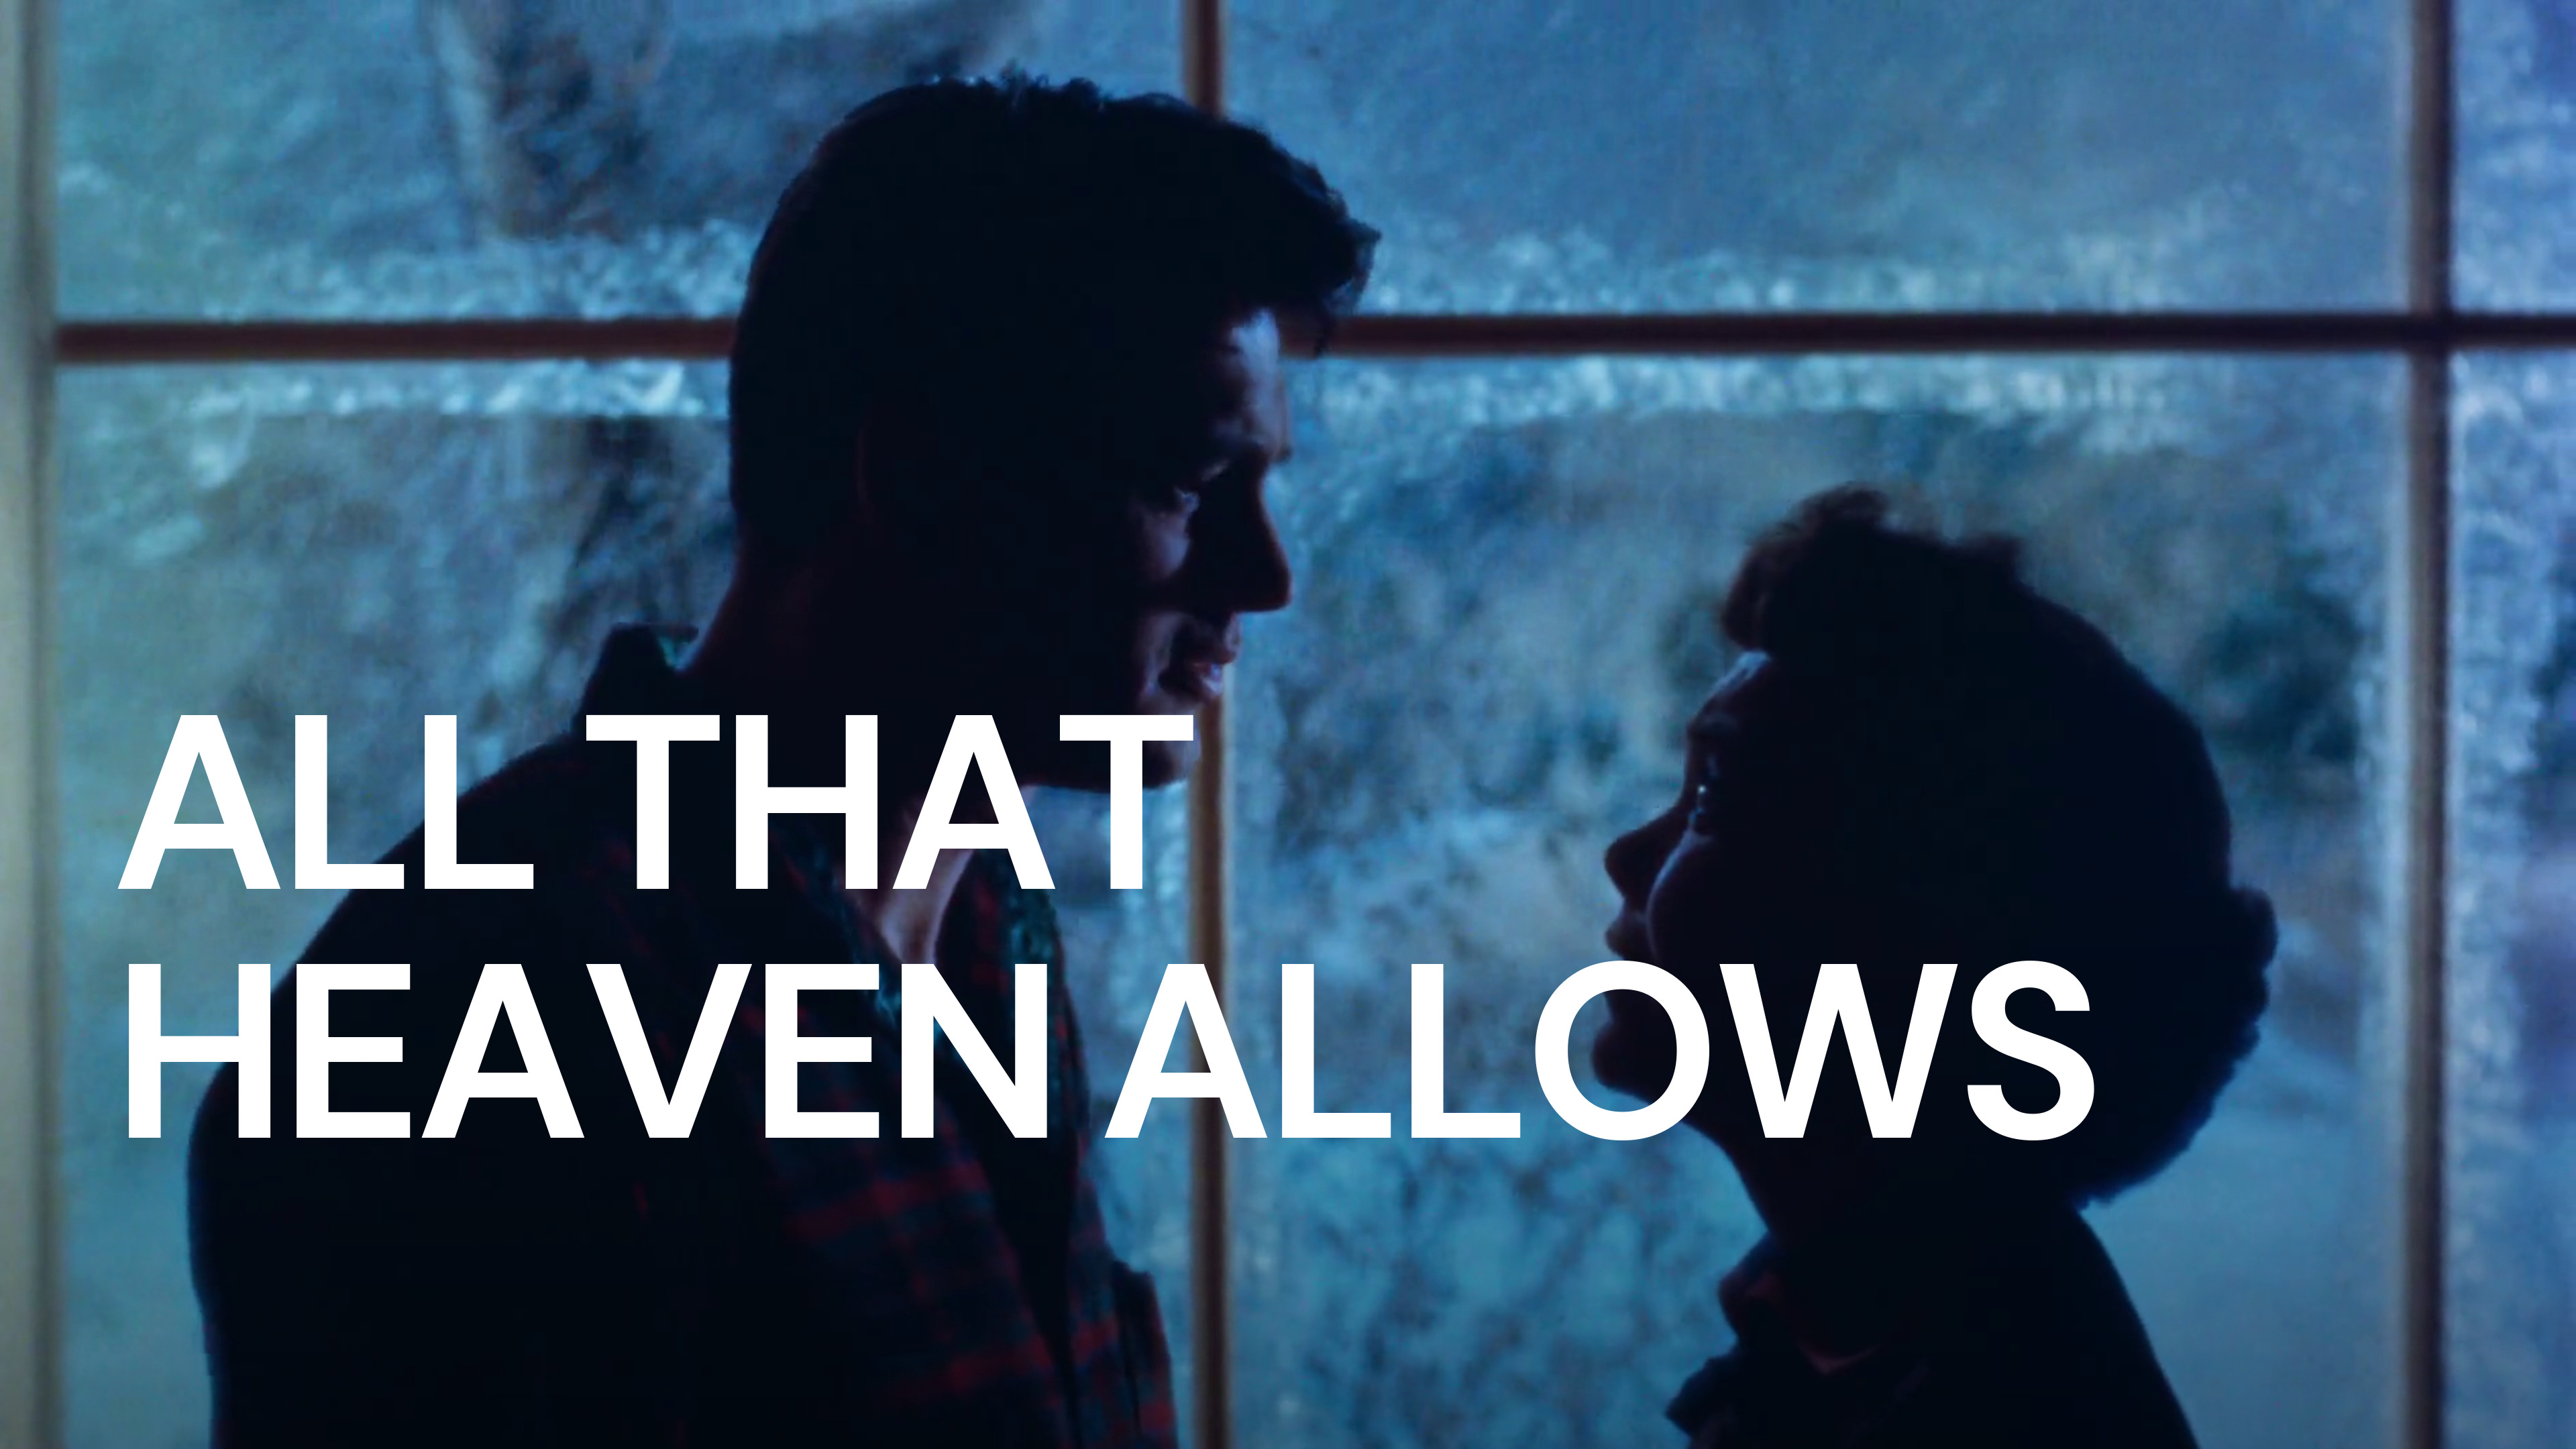 44-facts-about-the-movie-all-that-heaven-allows